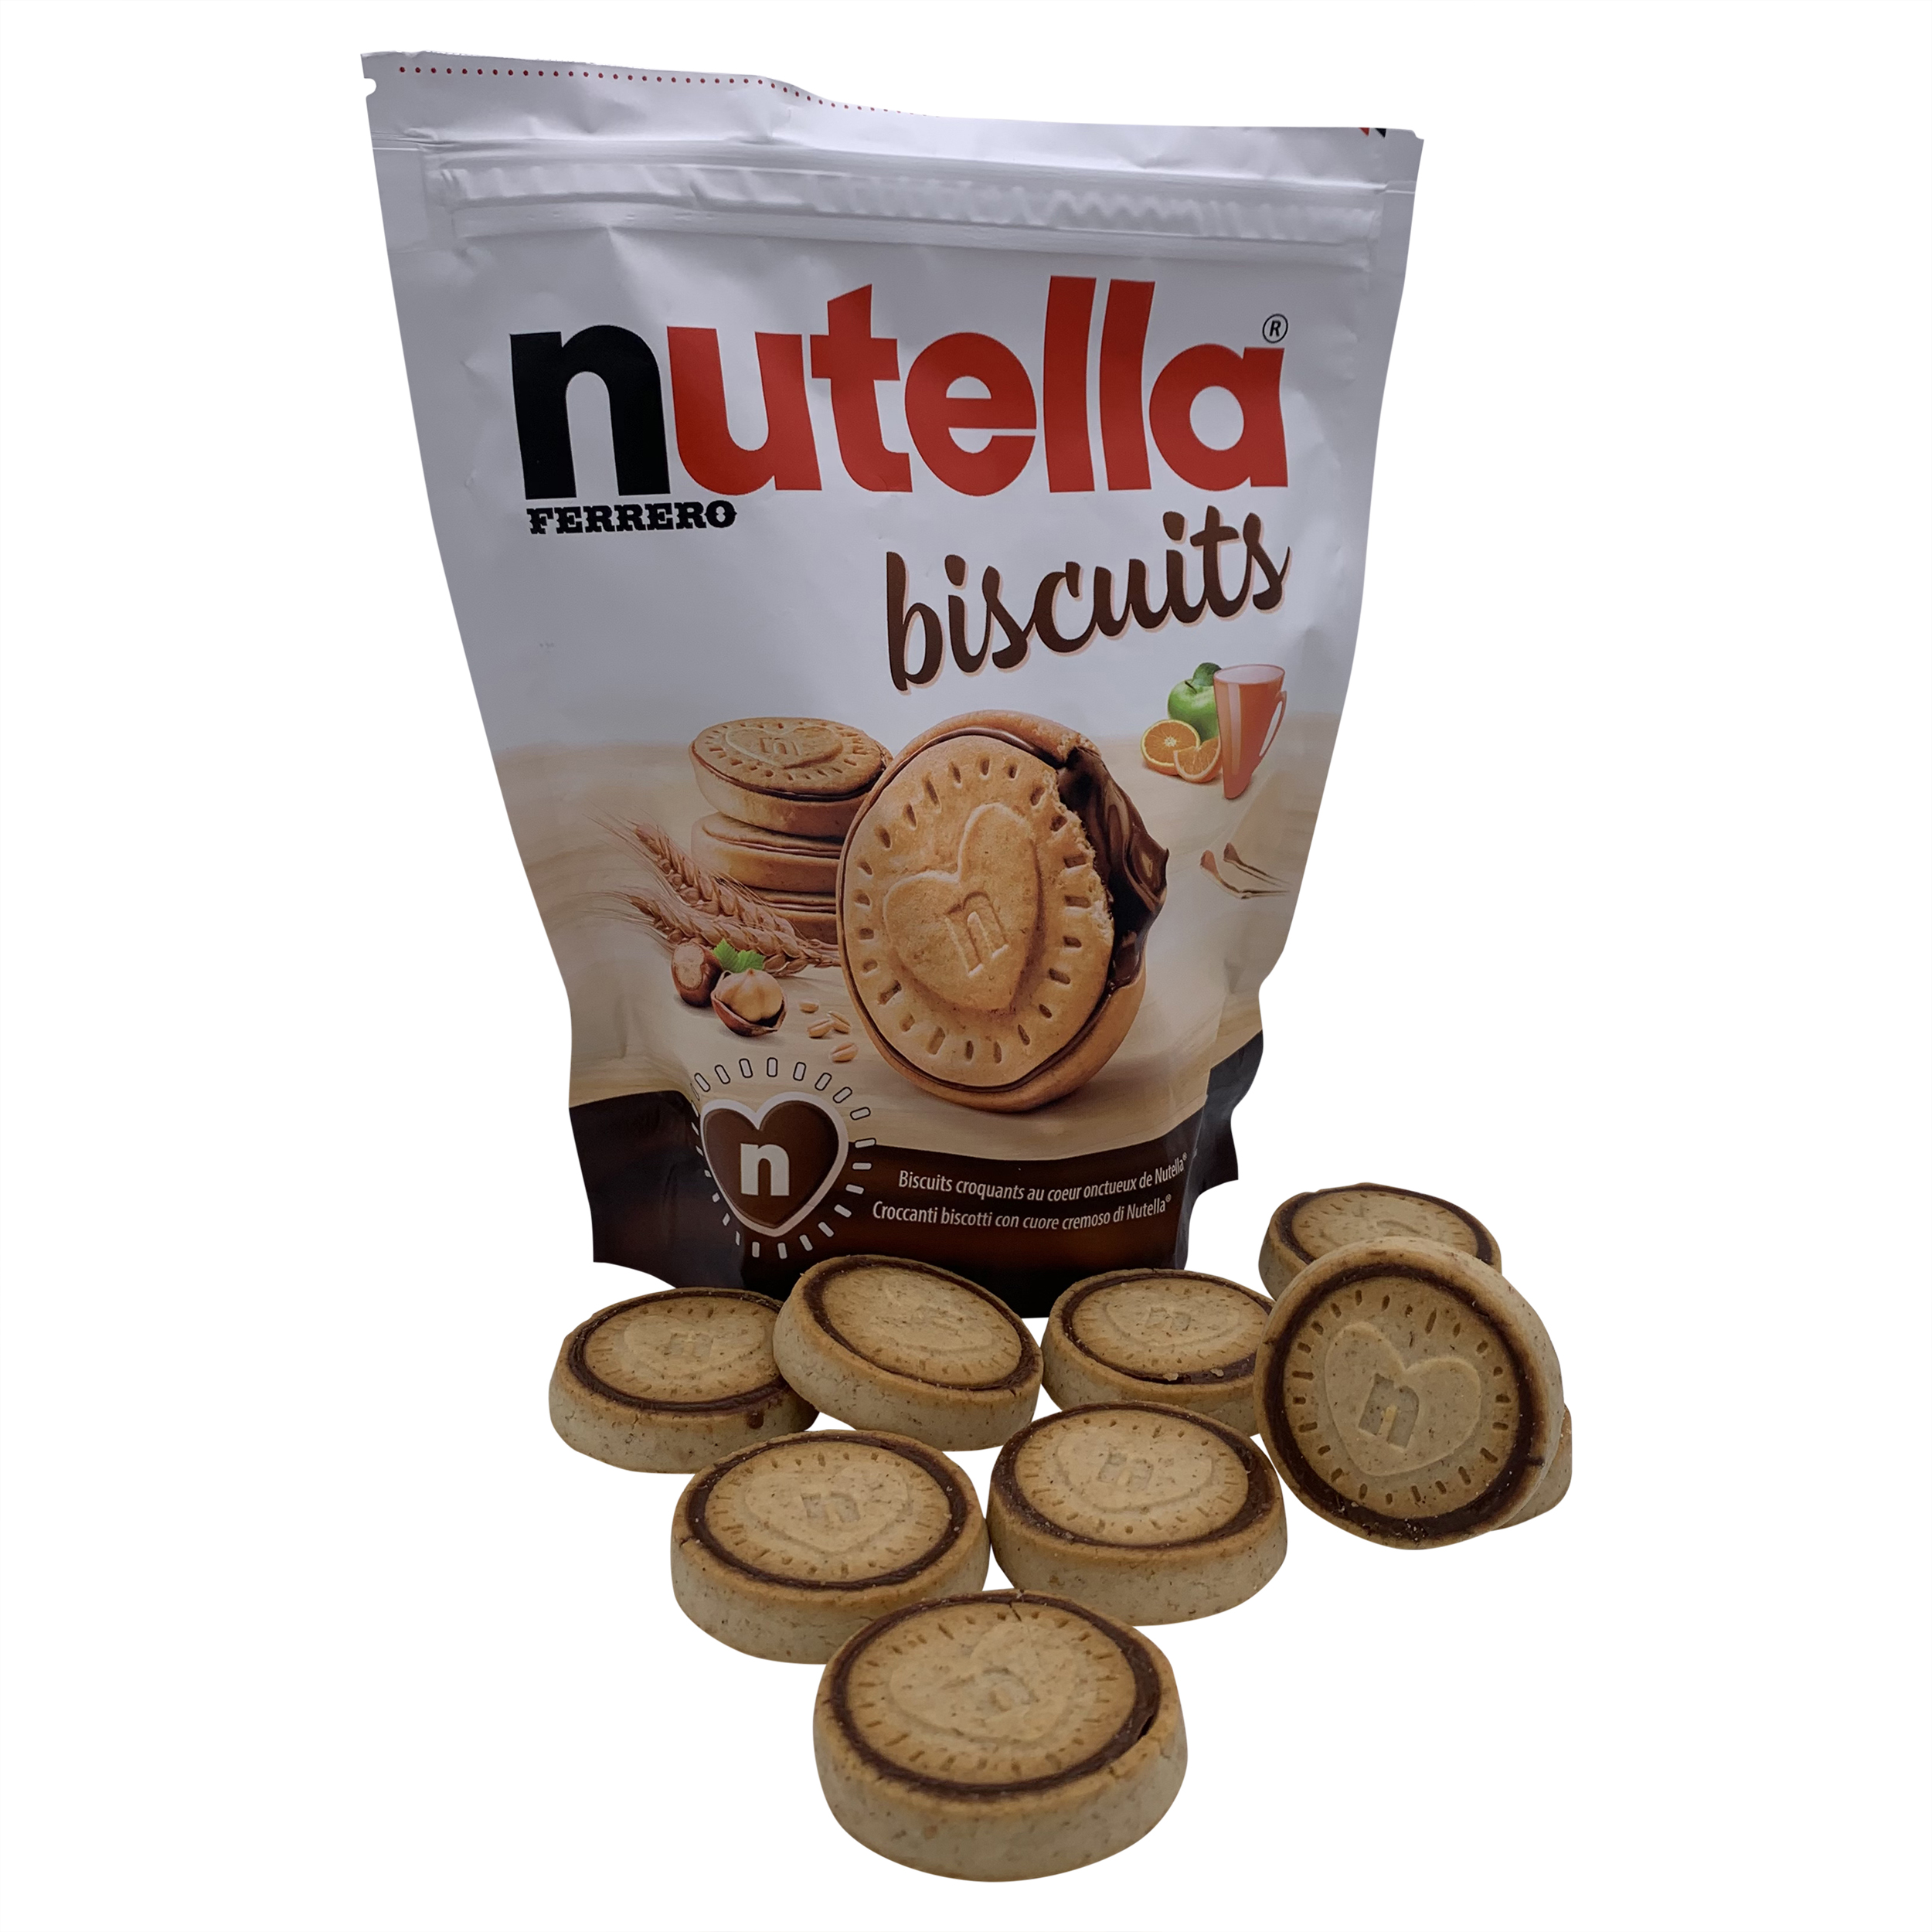 Nutella Biscuits Resealable Bag, Nutella Biscuits Cookies Ferrero, Ferrero  Nutella biscuits, Nutella Biscuits Italian